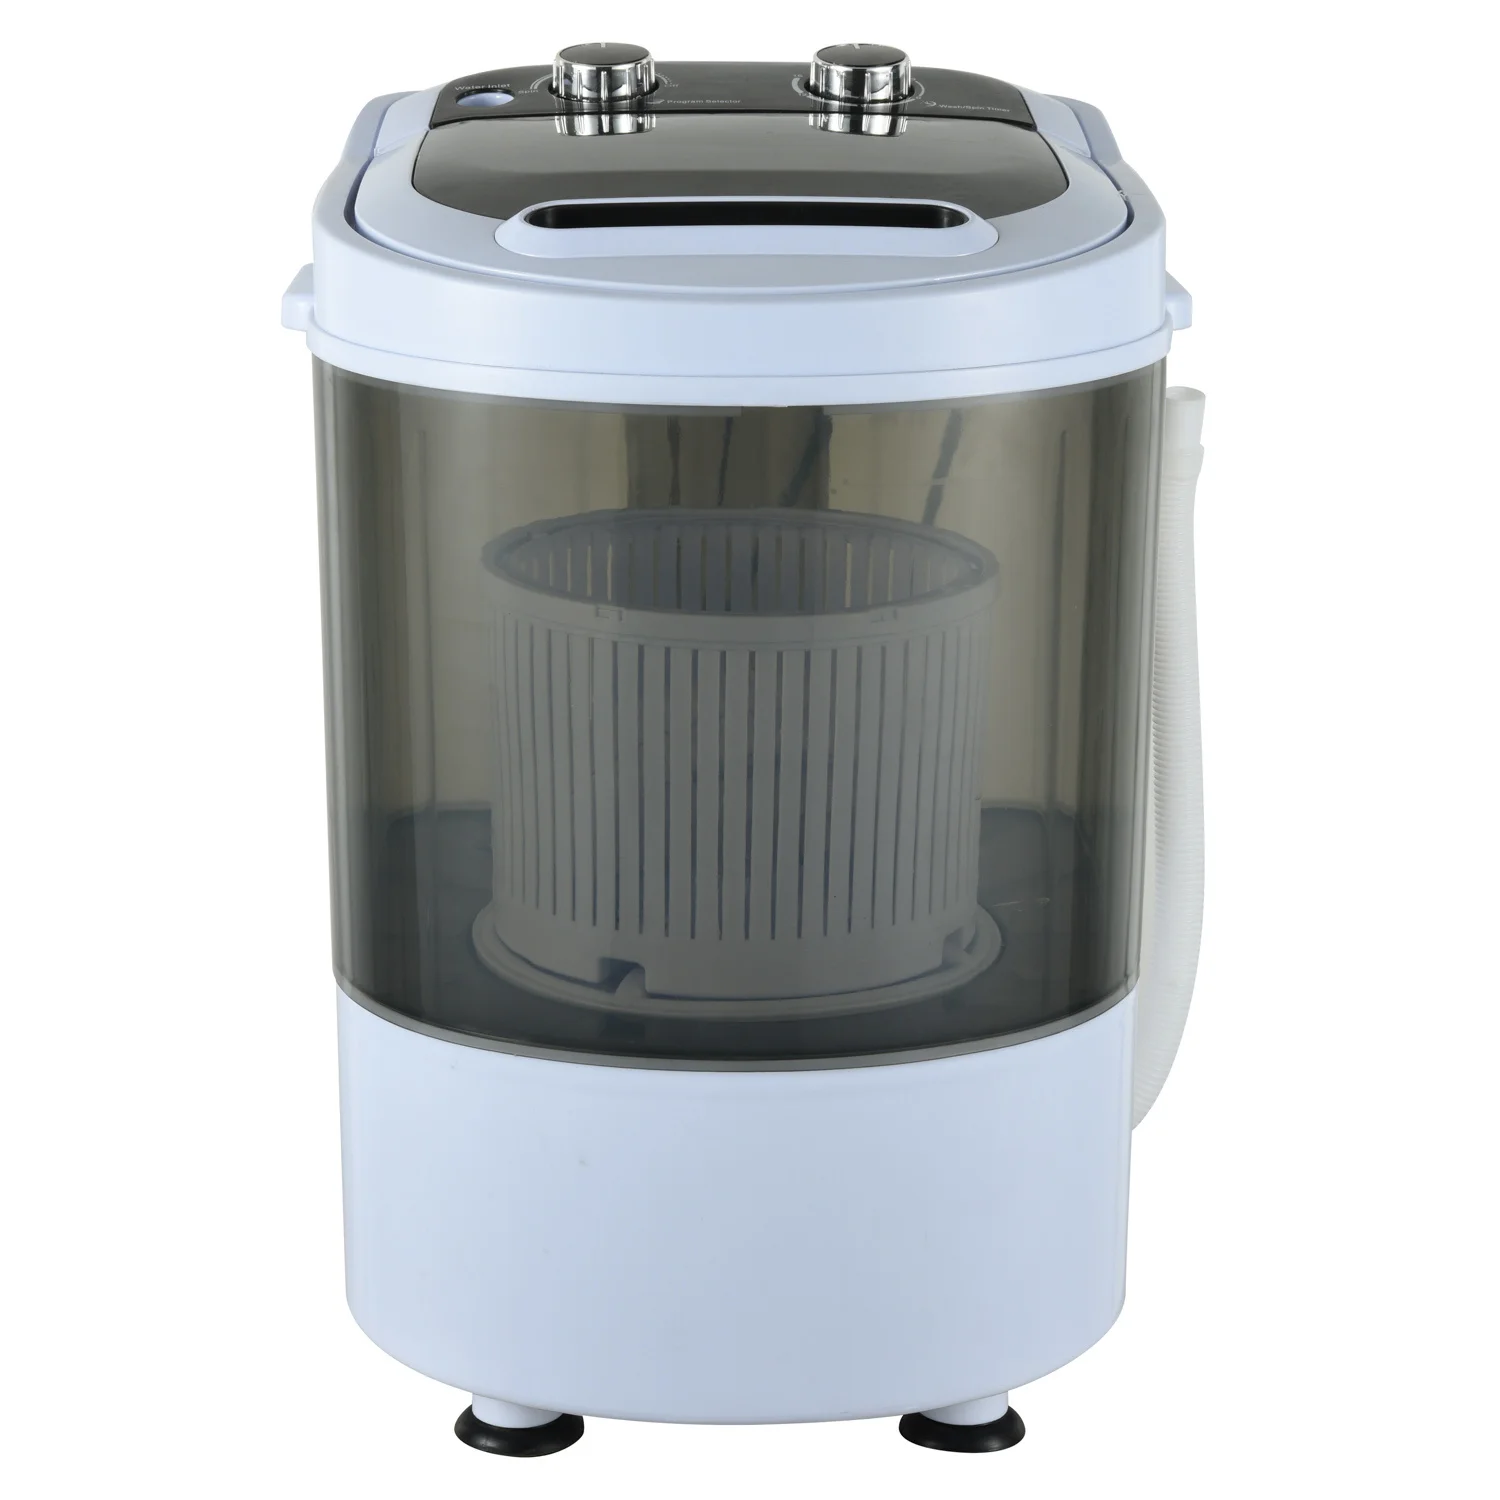 3kg Mini Portable Washing Machine With Spin Dryer - Buy 3kg Mini Portable  Washing Machine With Spin Dryer Product on